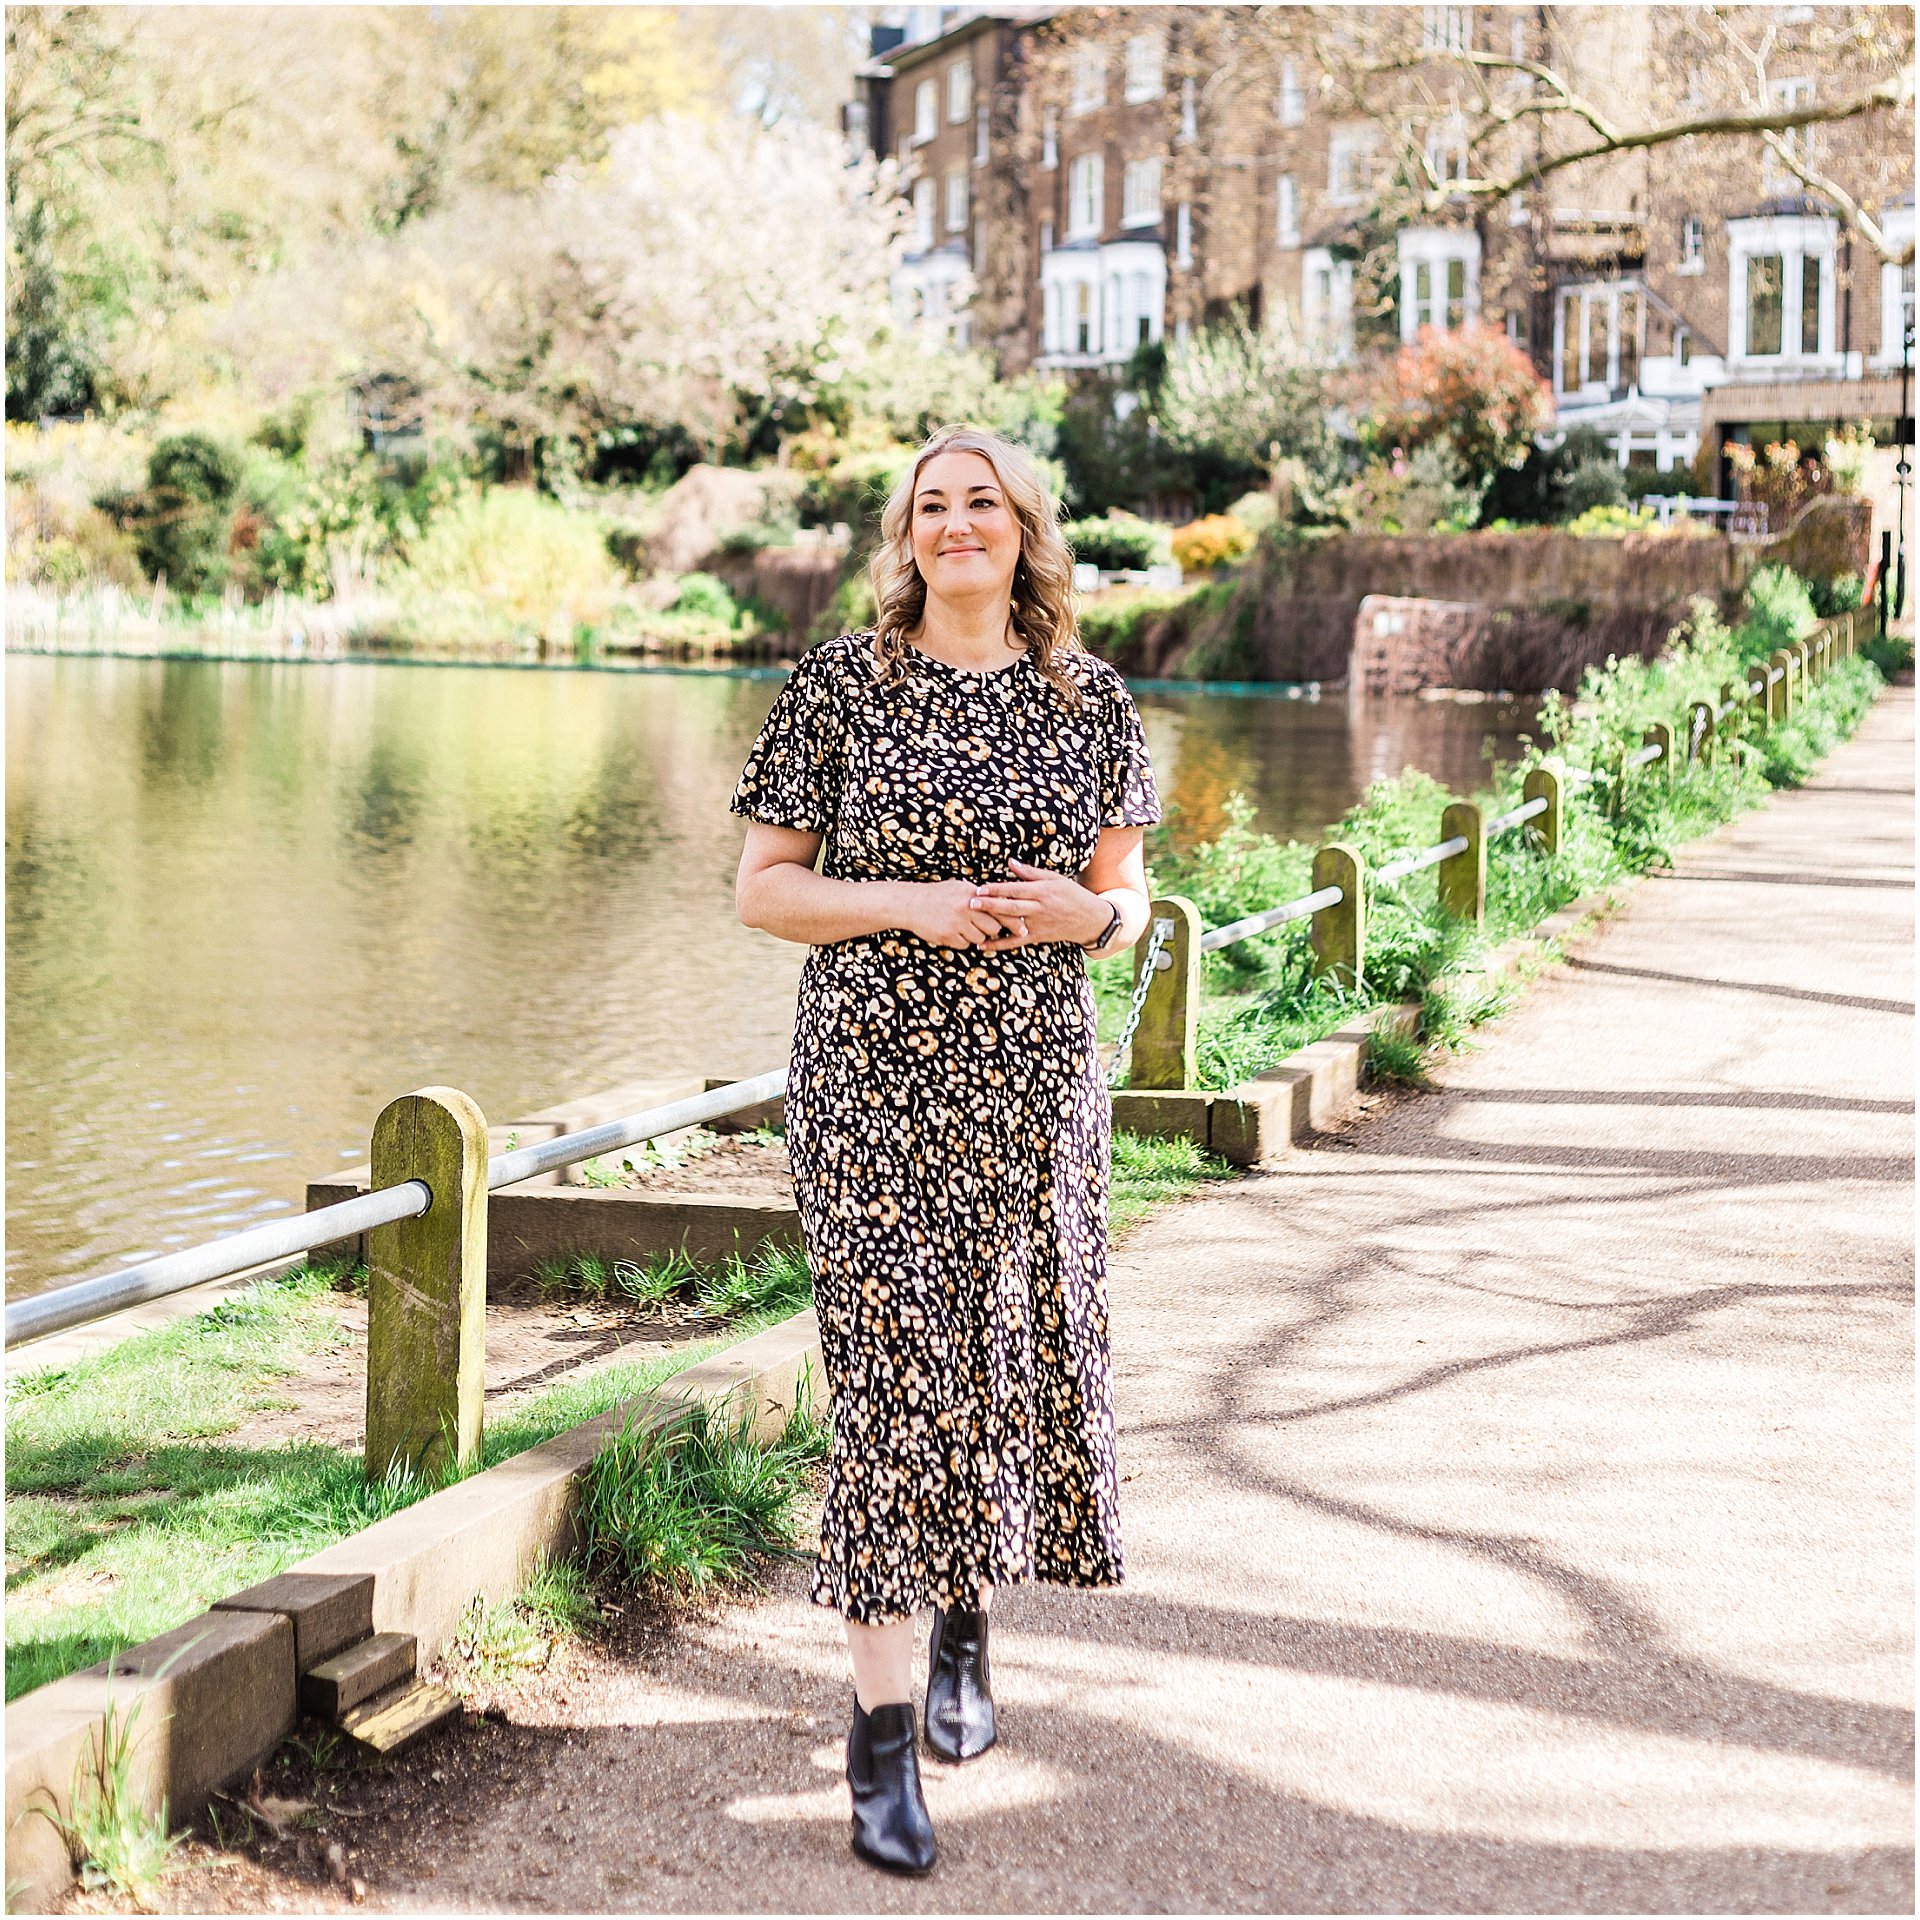 Geri from the Authentic Therapist in her Hampstead Heath Brand Shoot, Images by London brand photographer AKP Branding Stories